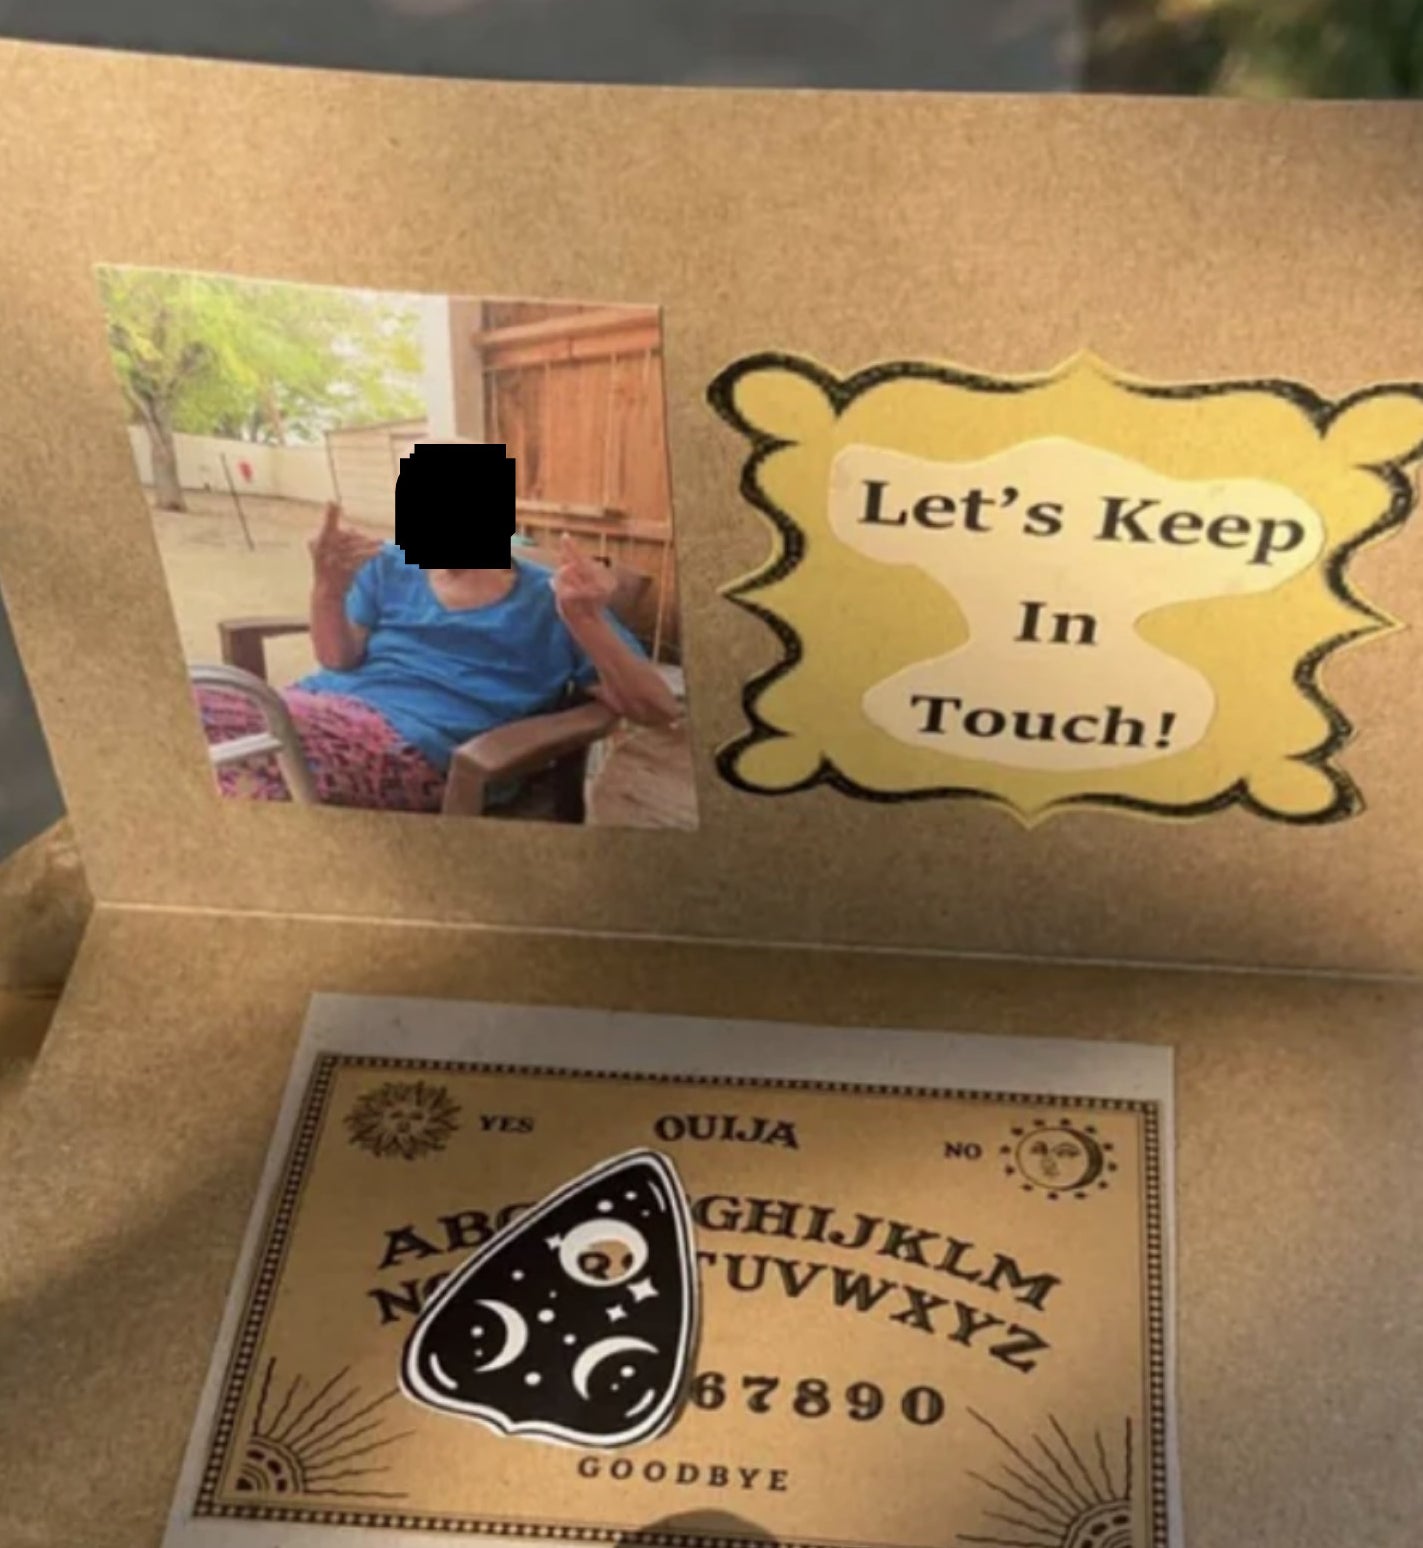 Photo of the dead person giving the finger, along with &quot;Let&#x27;s keep in touch!&quot; and a Ouija board saying &quot;Goodbye&quot;